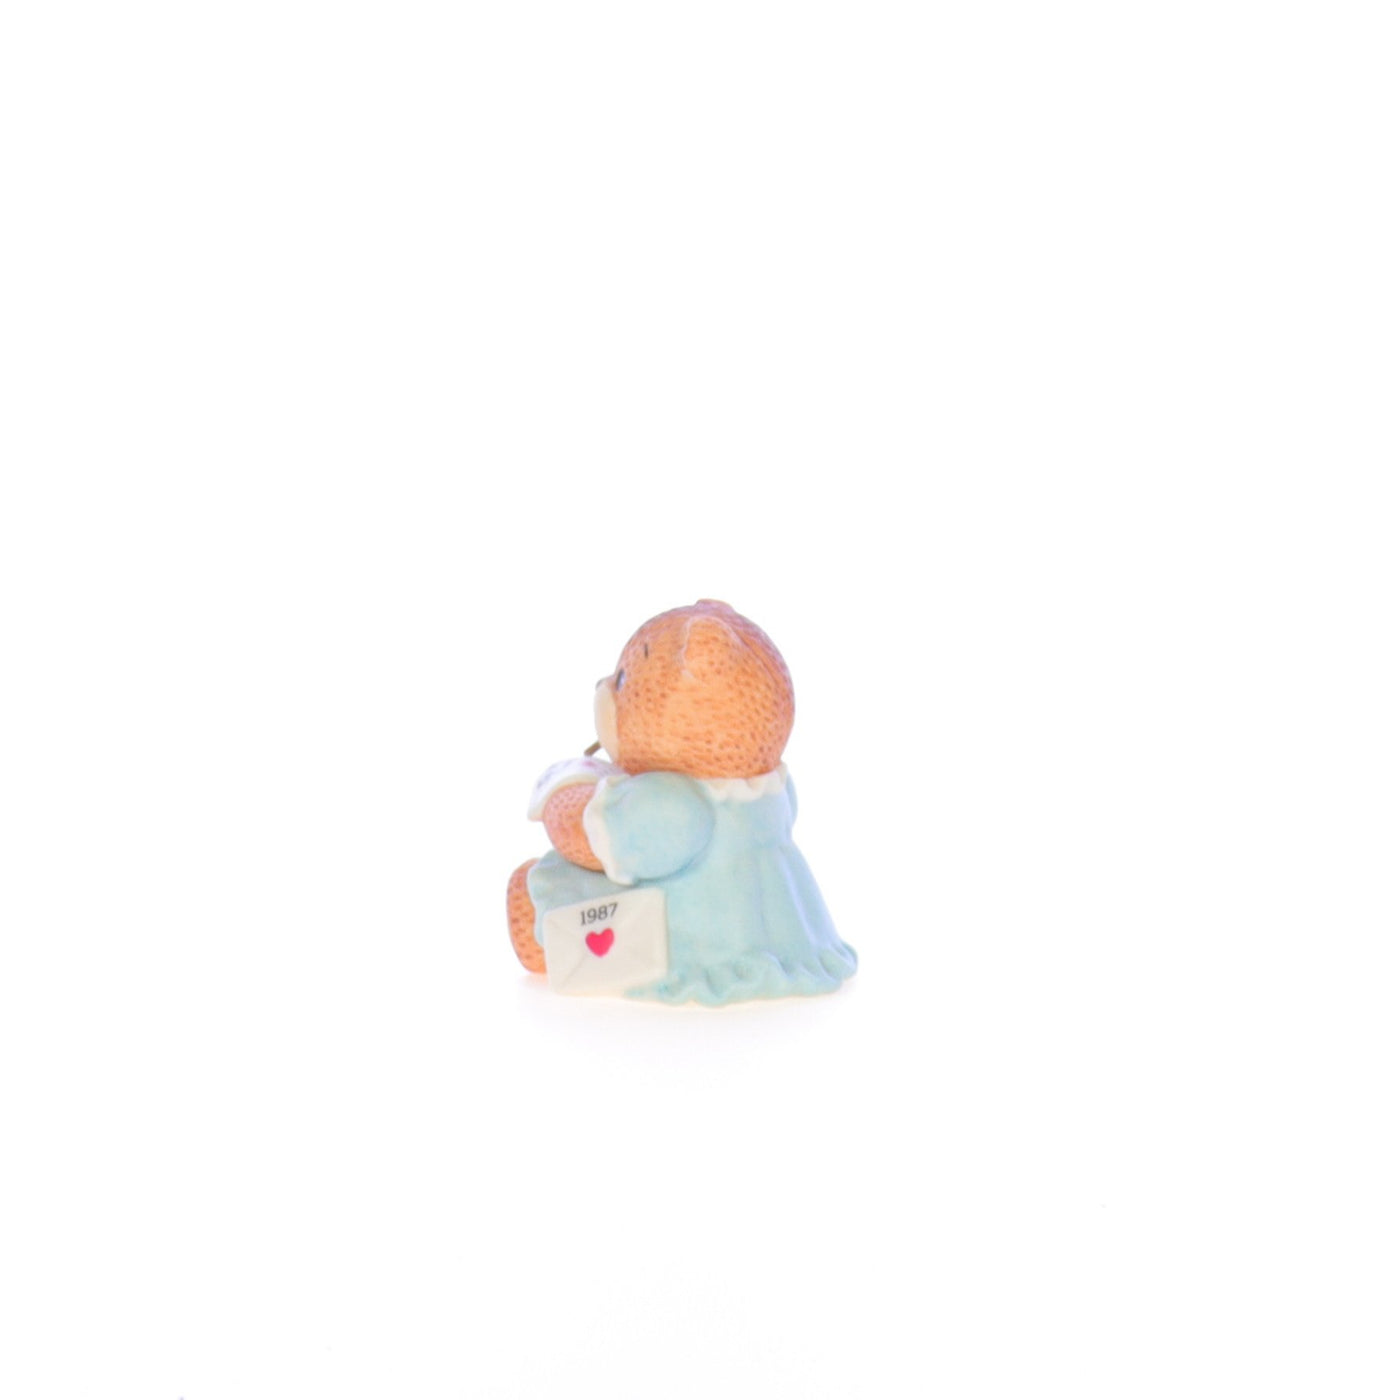 Lucy_And_Me_by_Lucy_Atwell_Porcelain_Figurine_Bear_Writing_Valentine_Lucy_Unknown_020_03